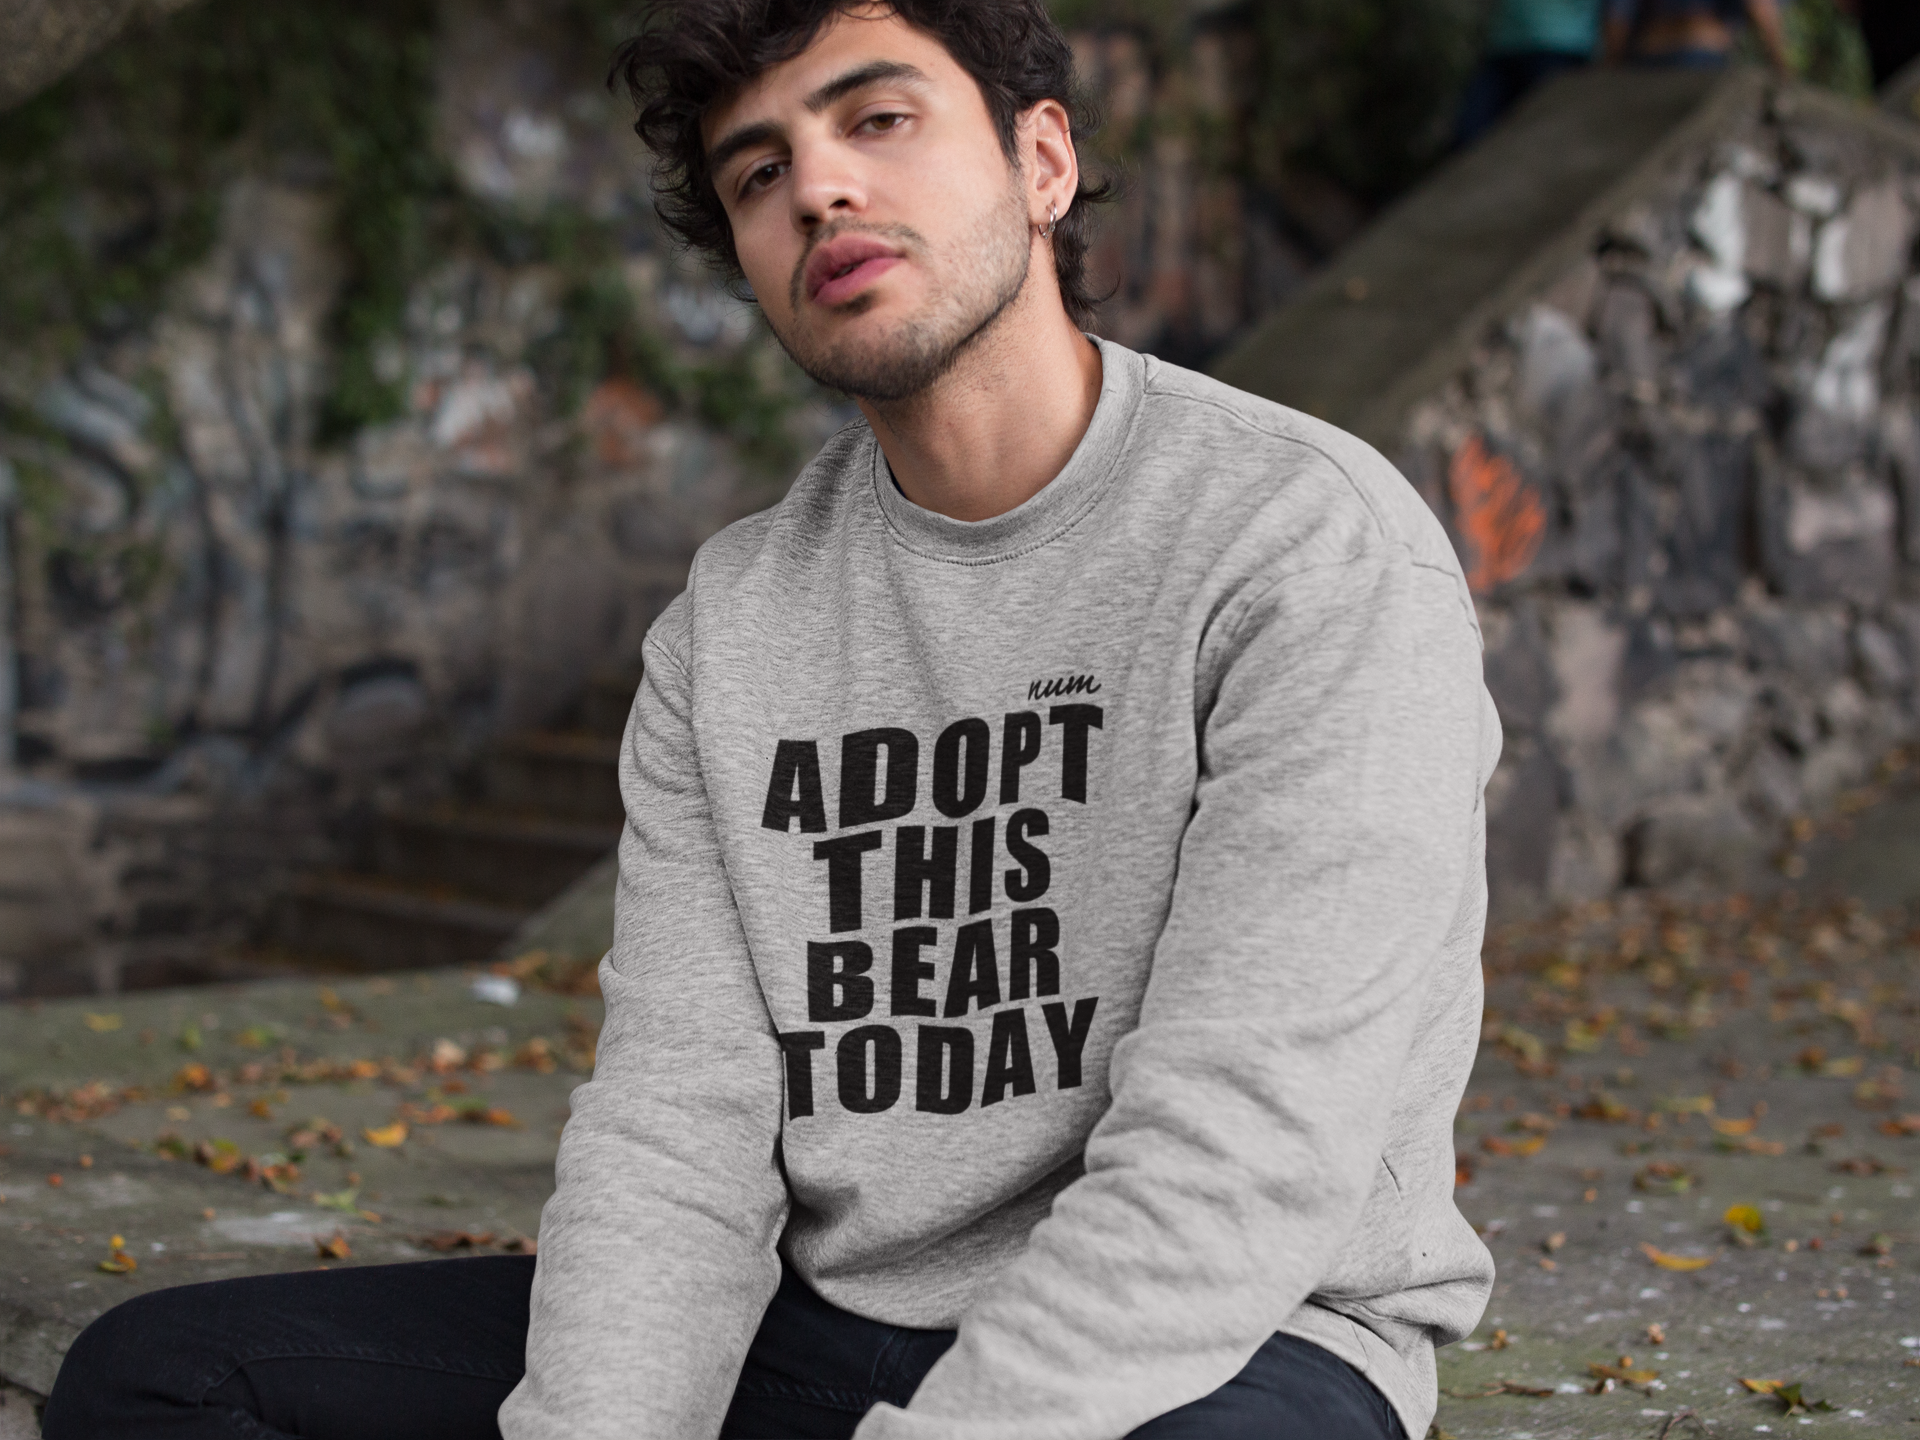 mockup-of-a-cool-serious-man-wearing-a-heathered-sweater-outdoors-18188.png